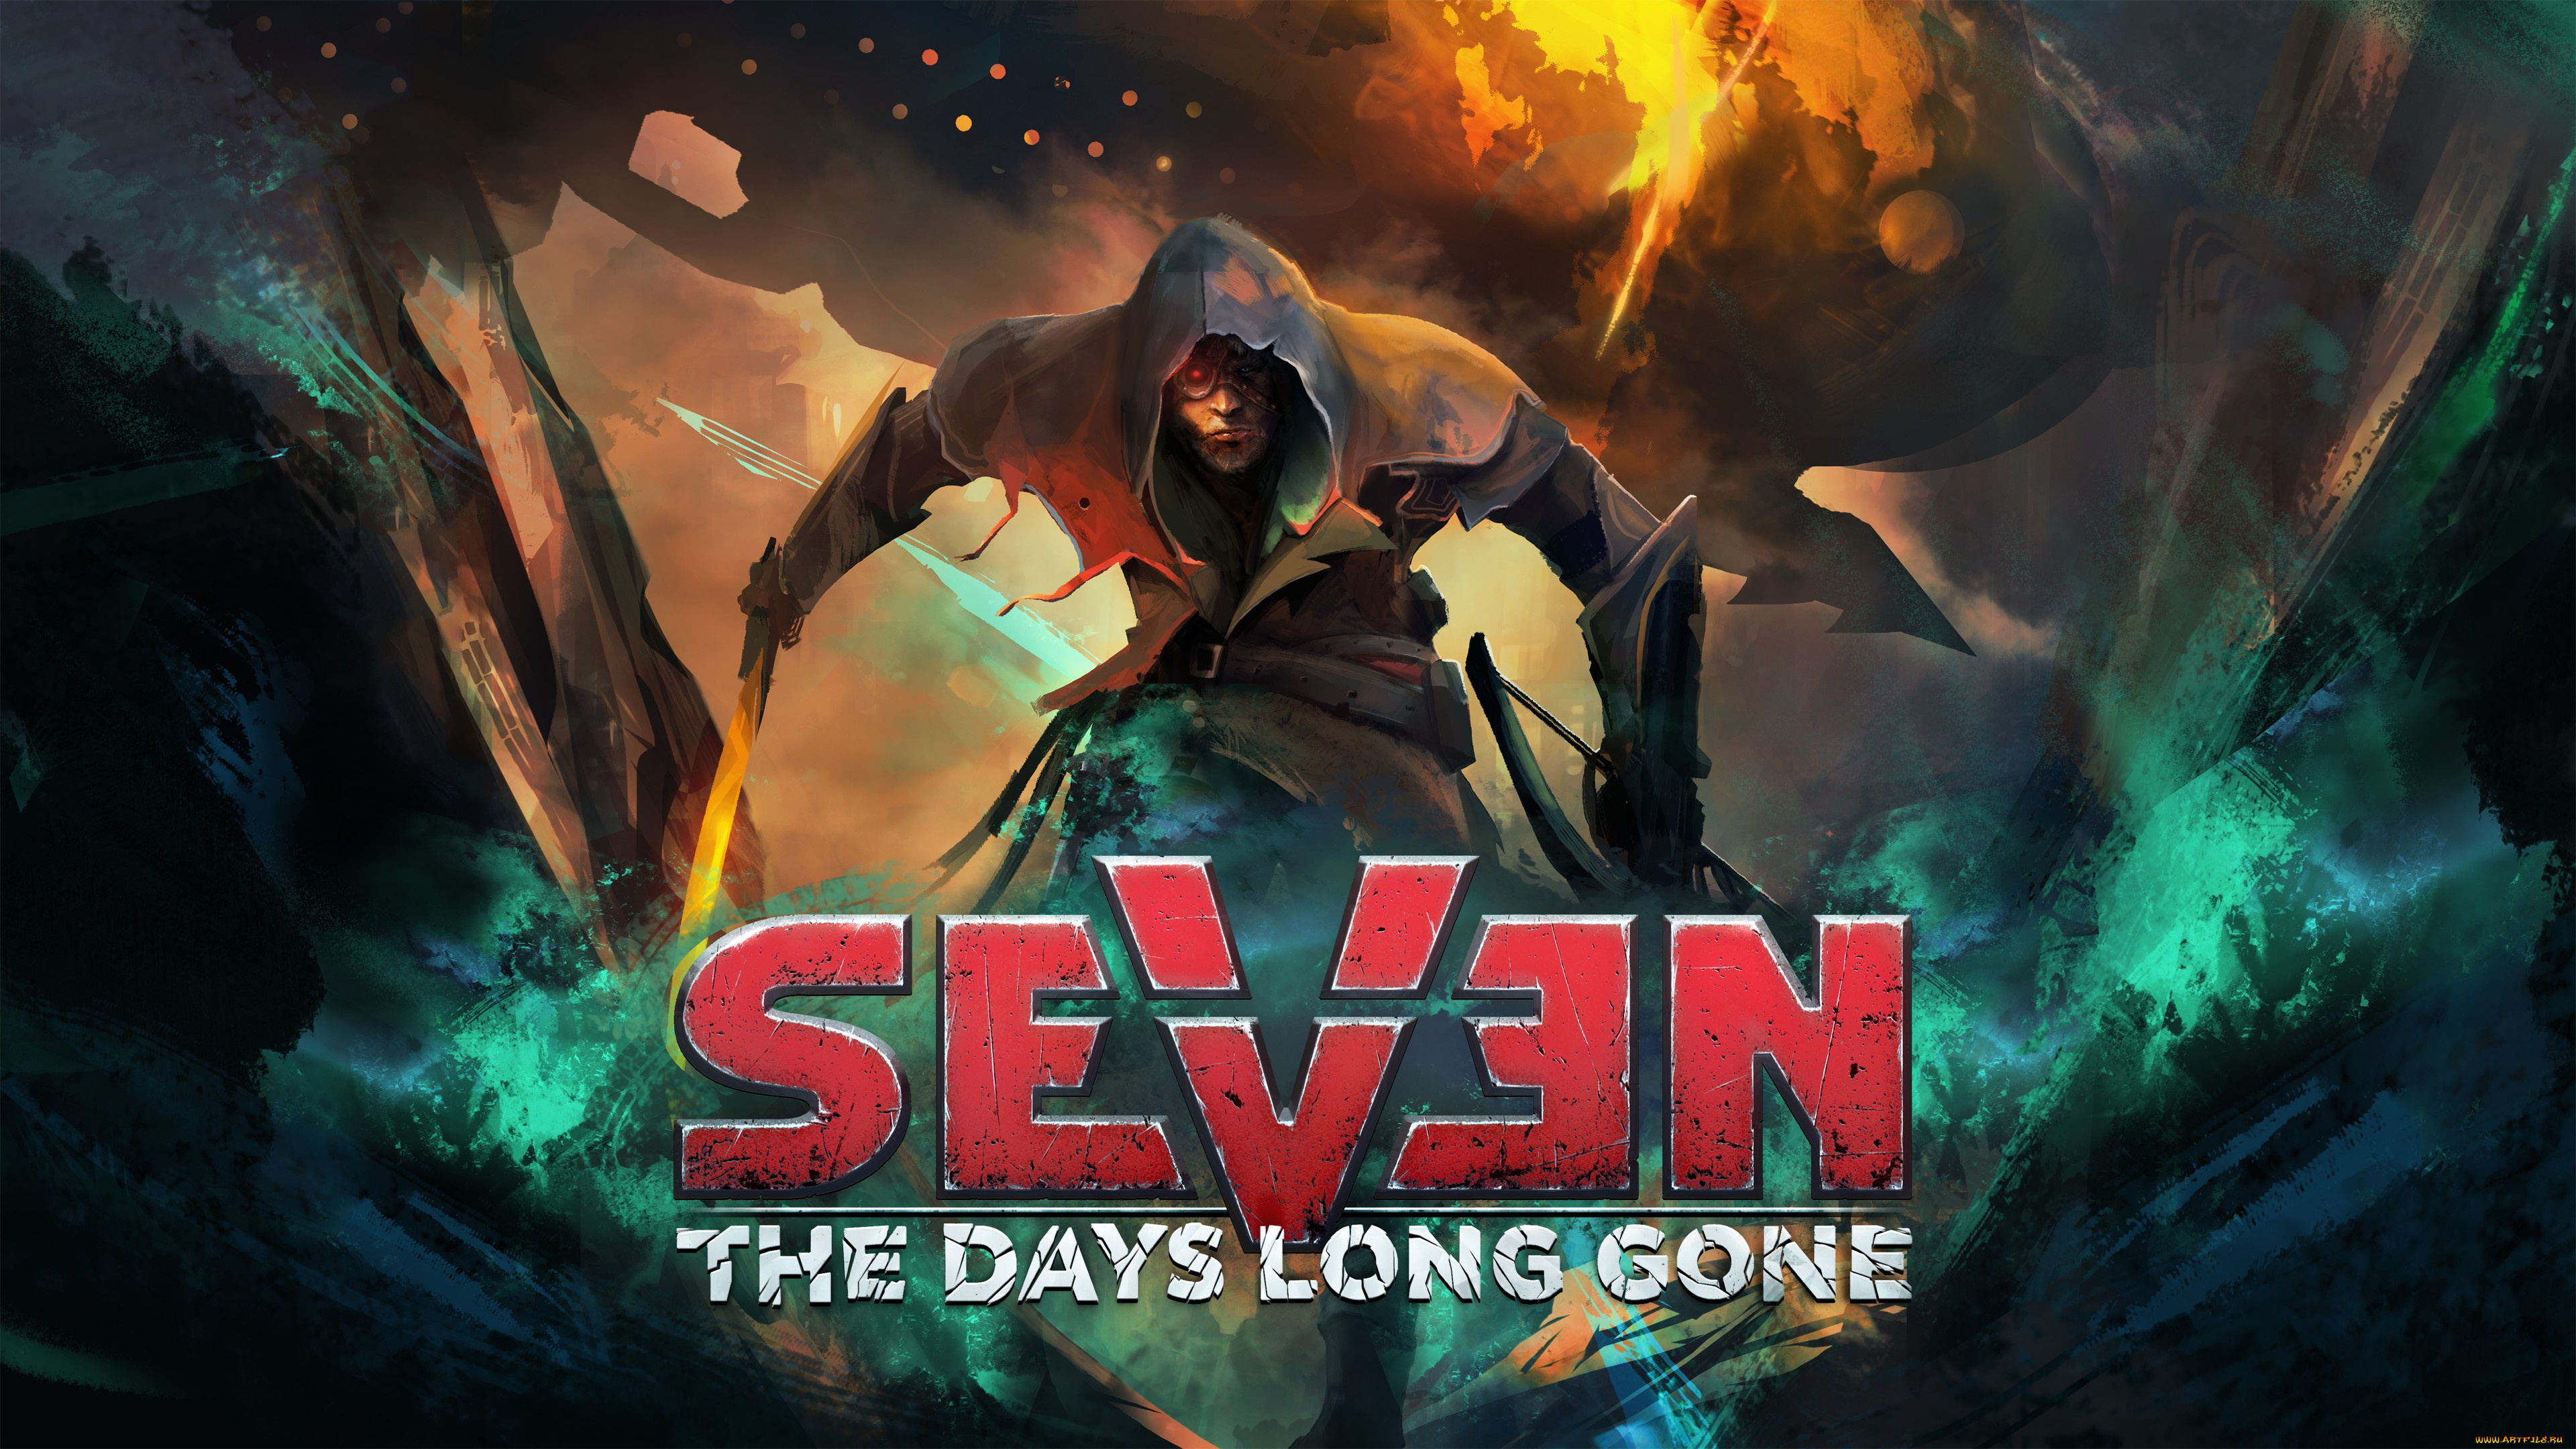 7 game live. Севен игра. Seven: the Days long gone. Seven: enhanced the Days long gone. 7 Days long gone.